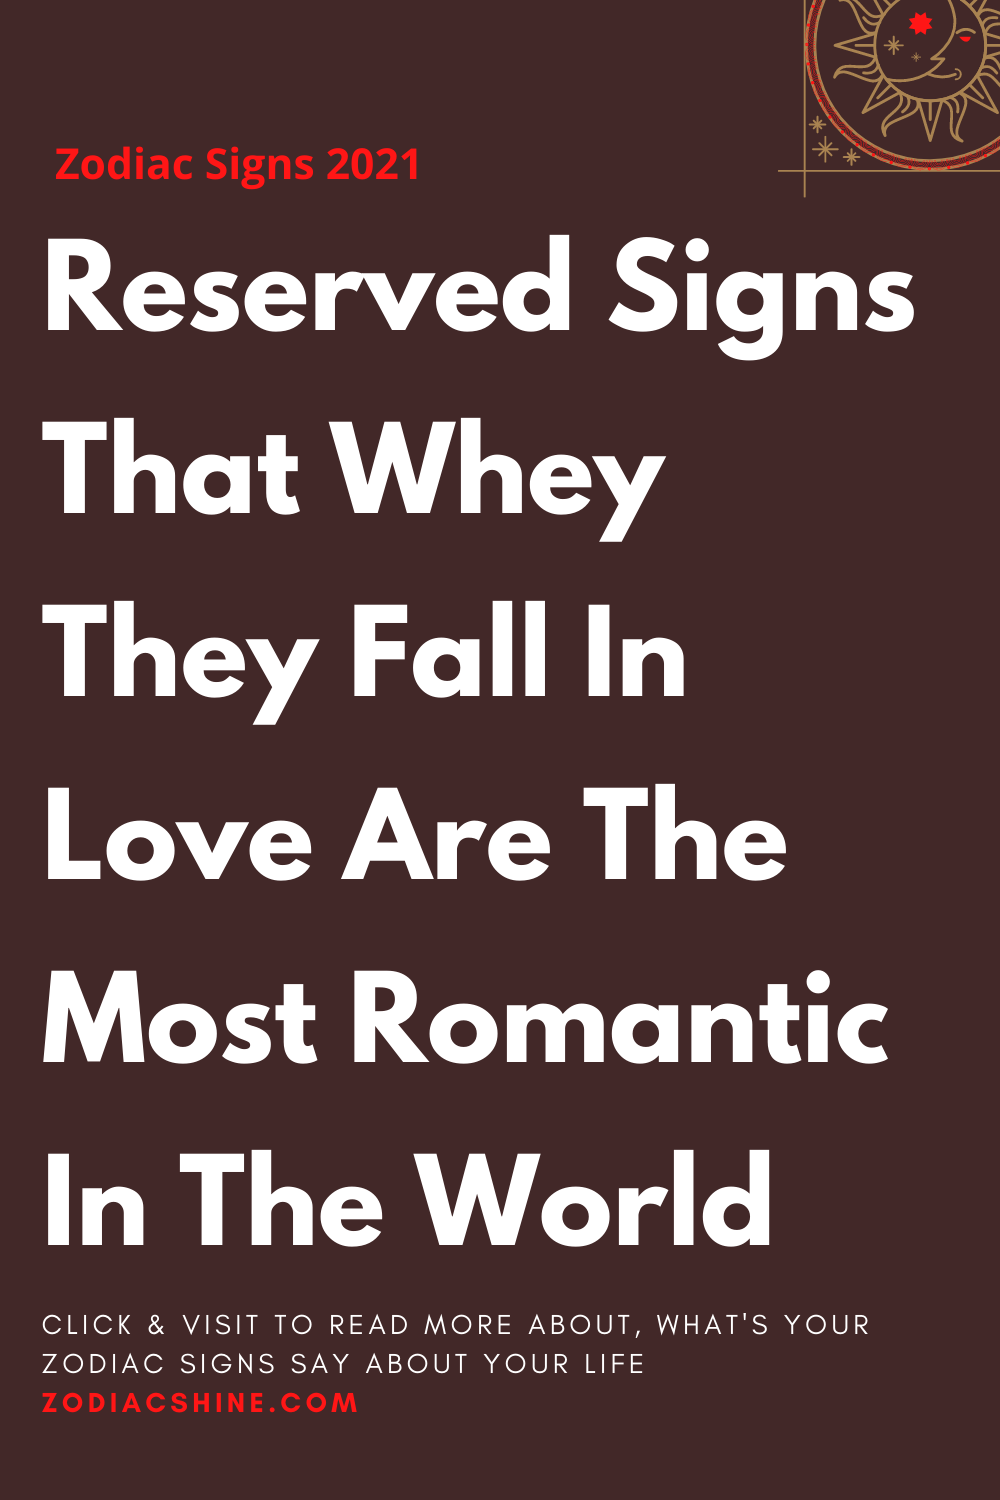 Reserved Signs That Whey They Fall In Love Are The Most Romantic In The World